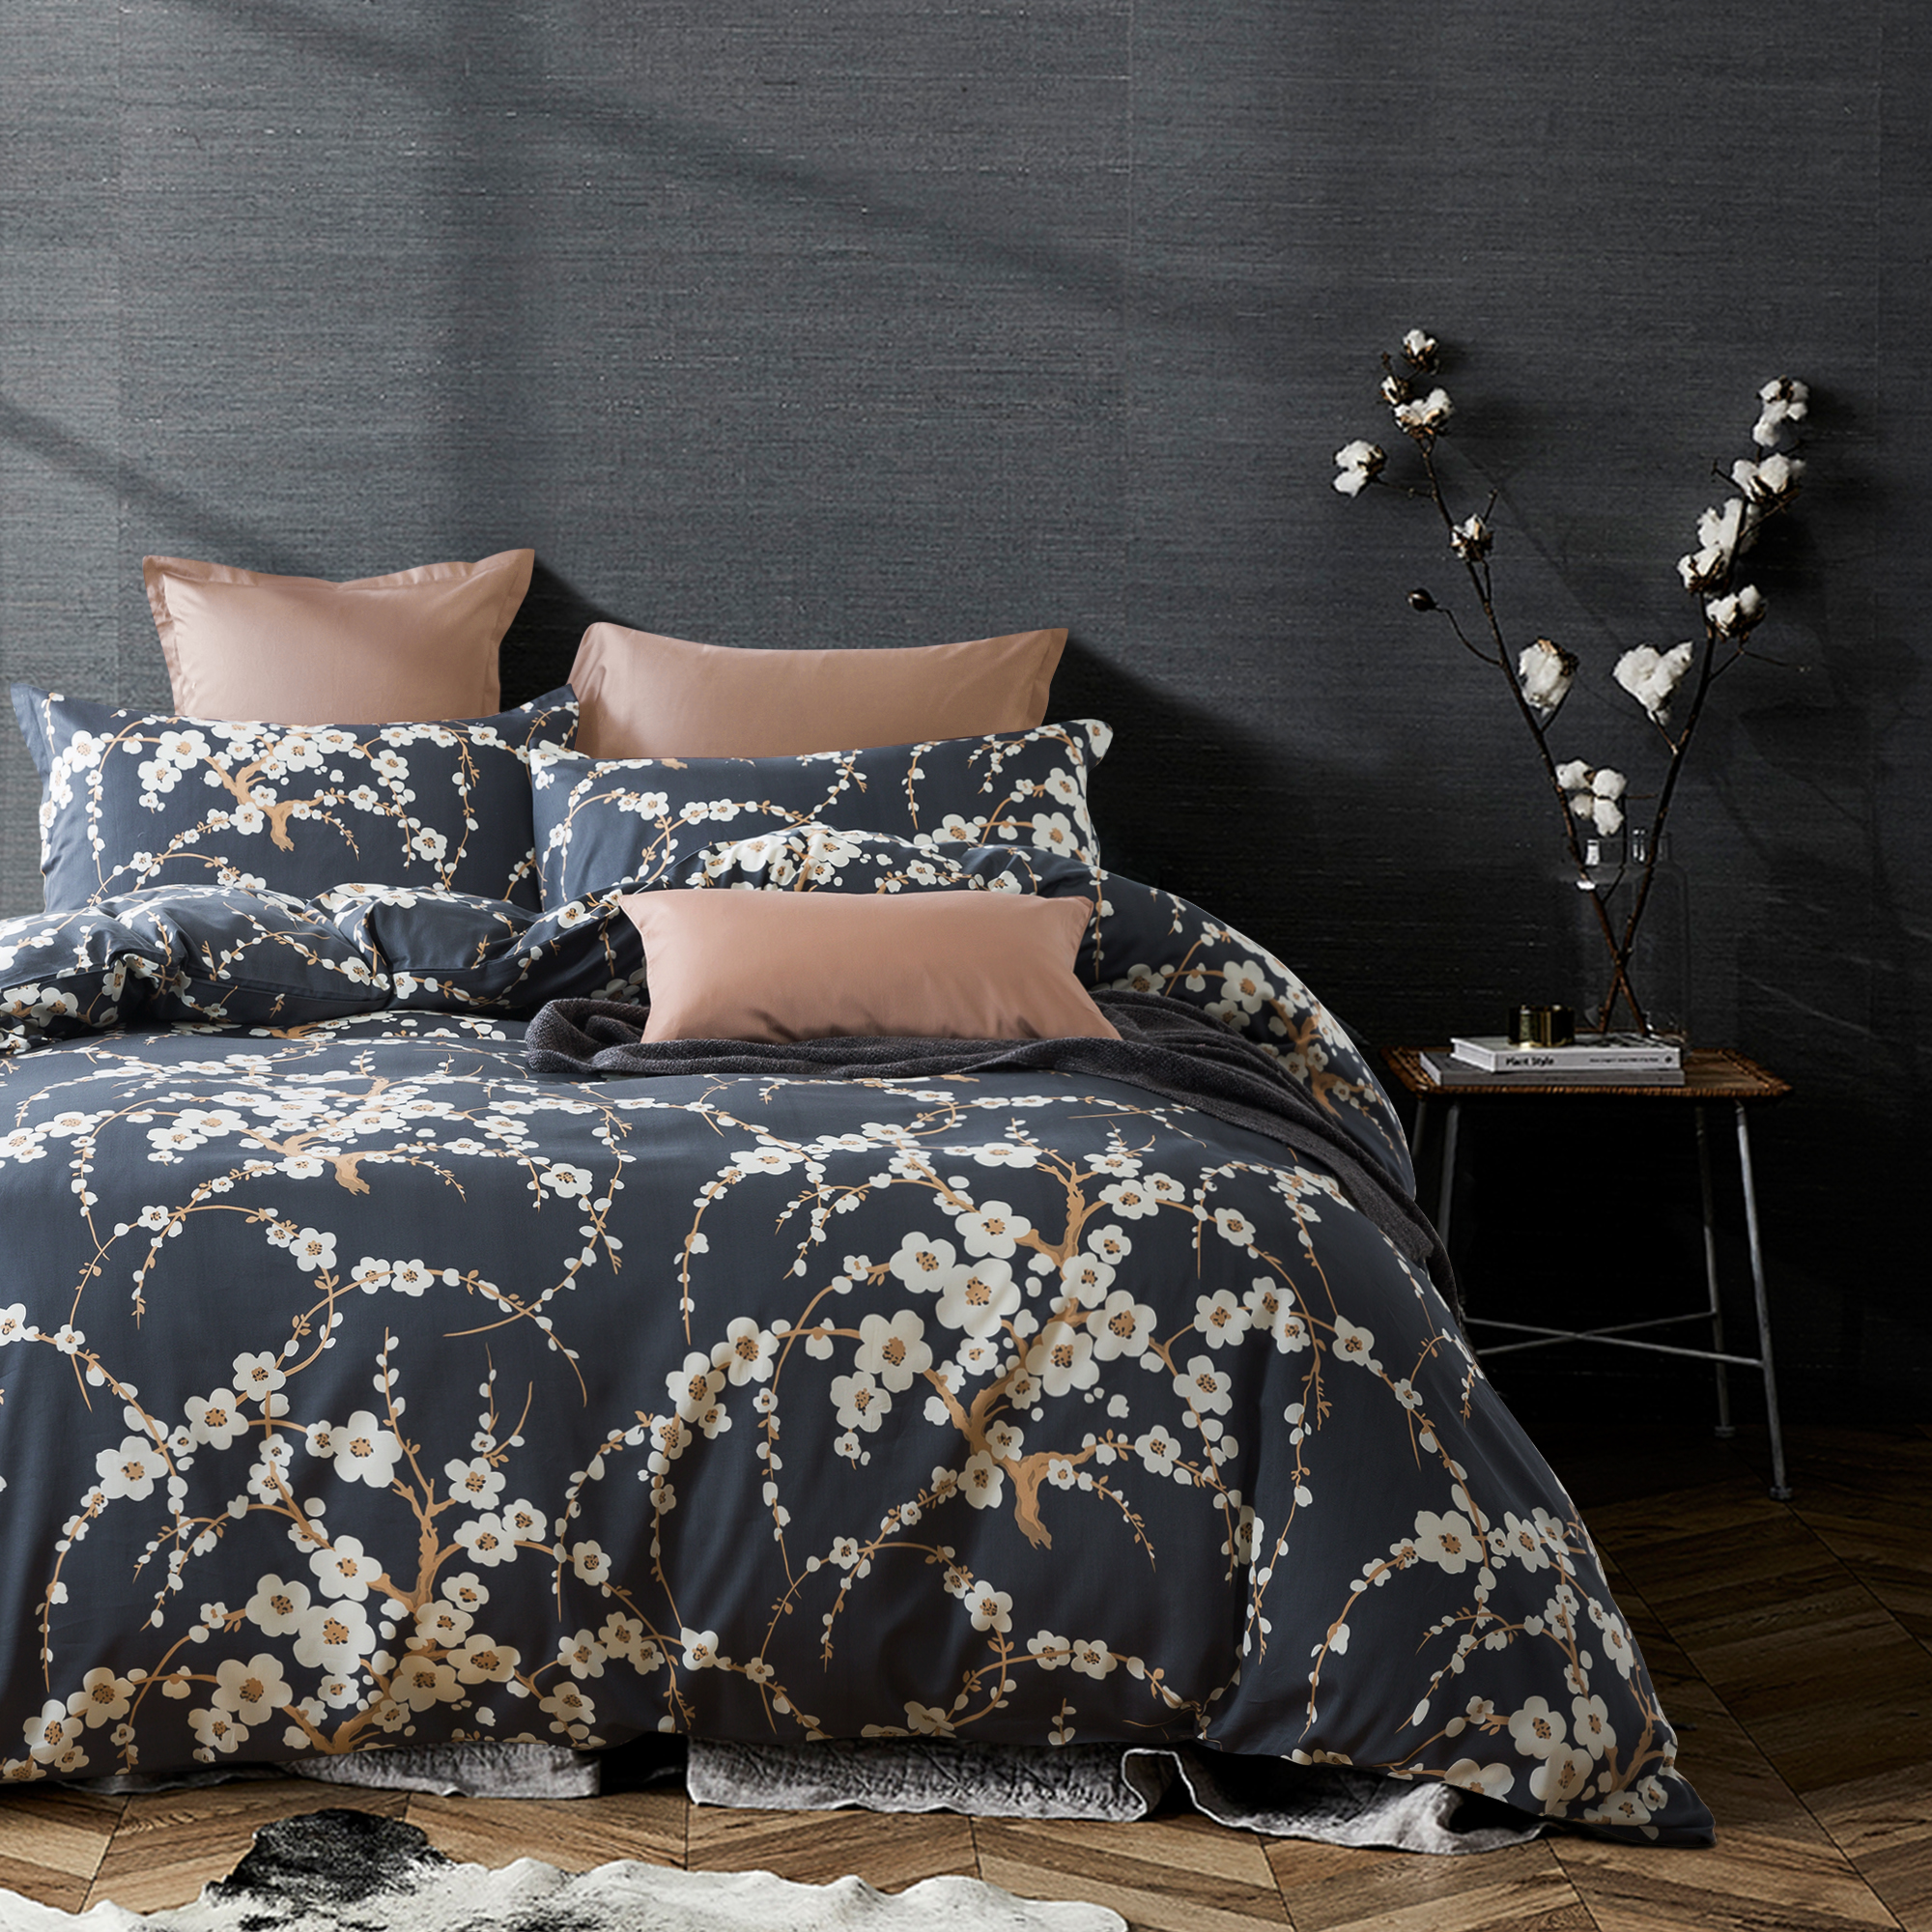 Japanese Oriental Style Cherry Blossom Floral Branches Print Duvet Cover  400tc Cotton Bedding Set Charcoal Grey